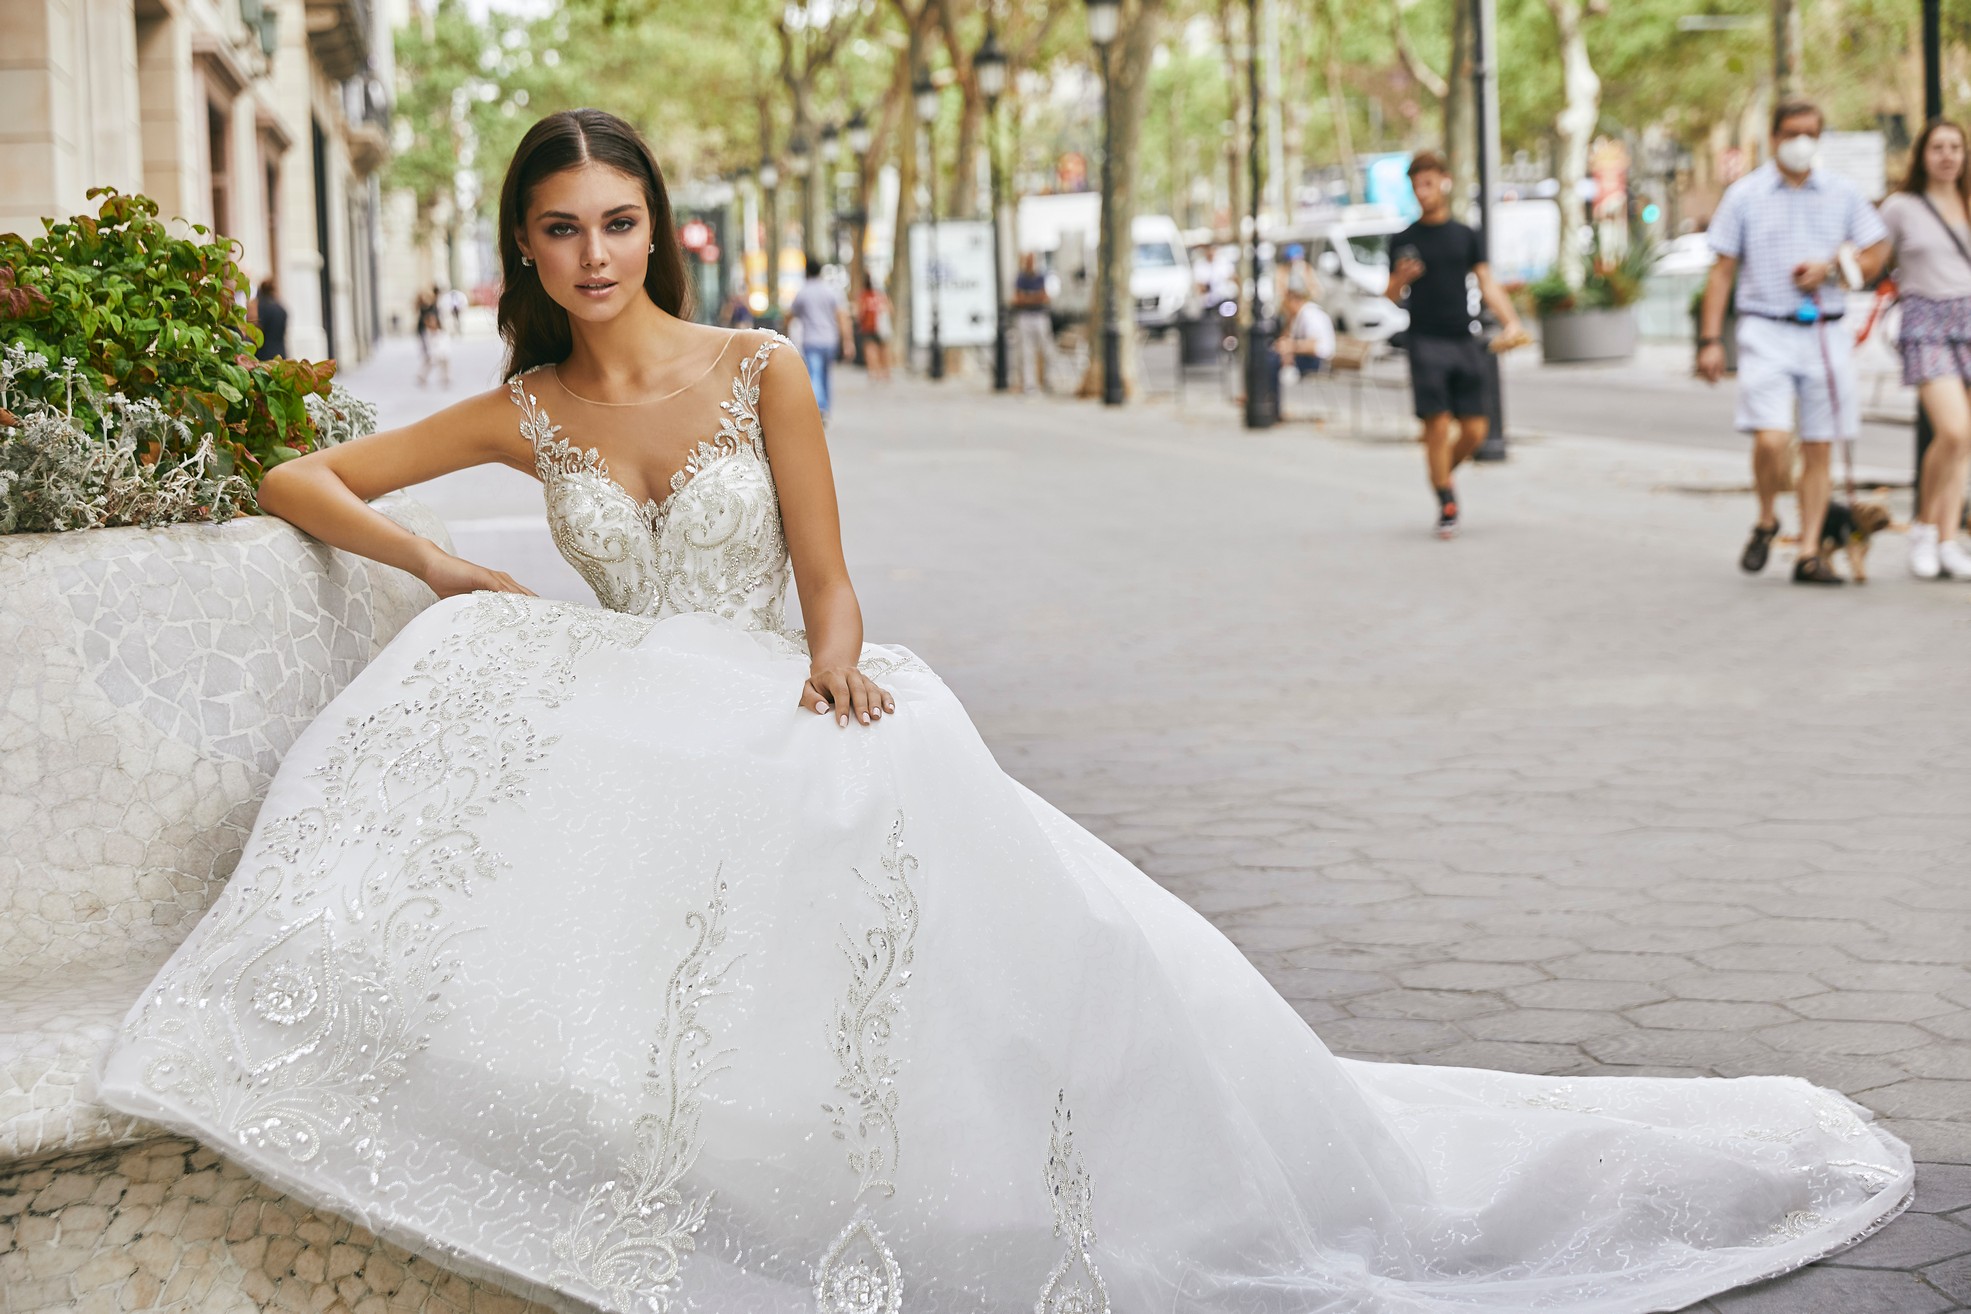 Brunette model sat in a tree-lined sunny street in Ronald Joyce 69720, an ivory A-line wedding dress style with an illusion sweetheart neckline, silver beaded bodice and illusion off-the-shoulder straps